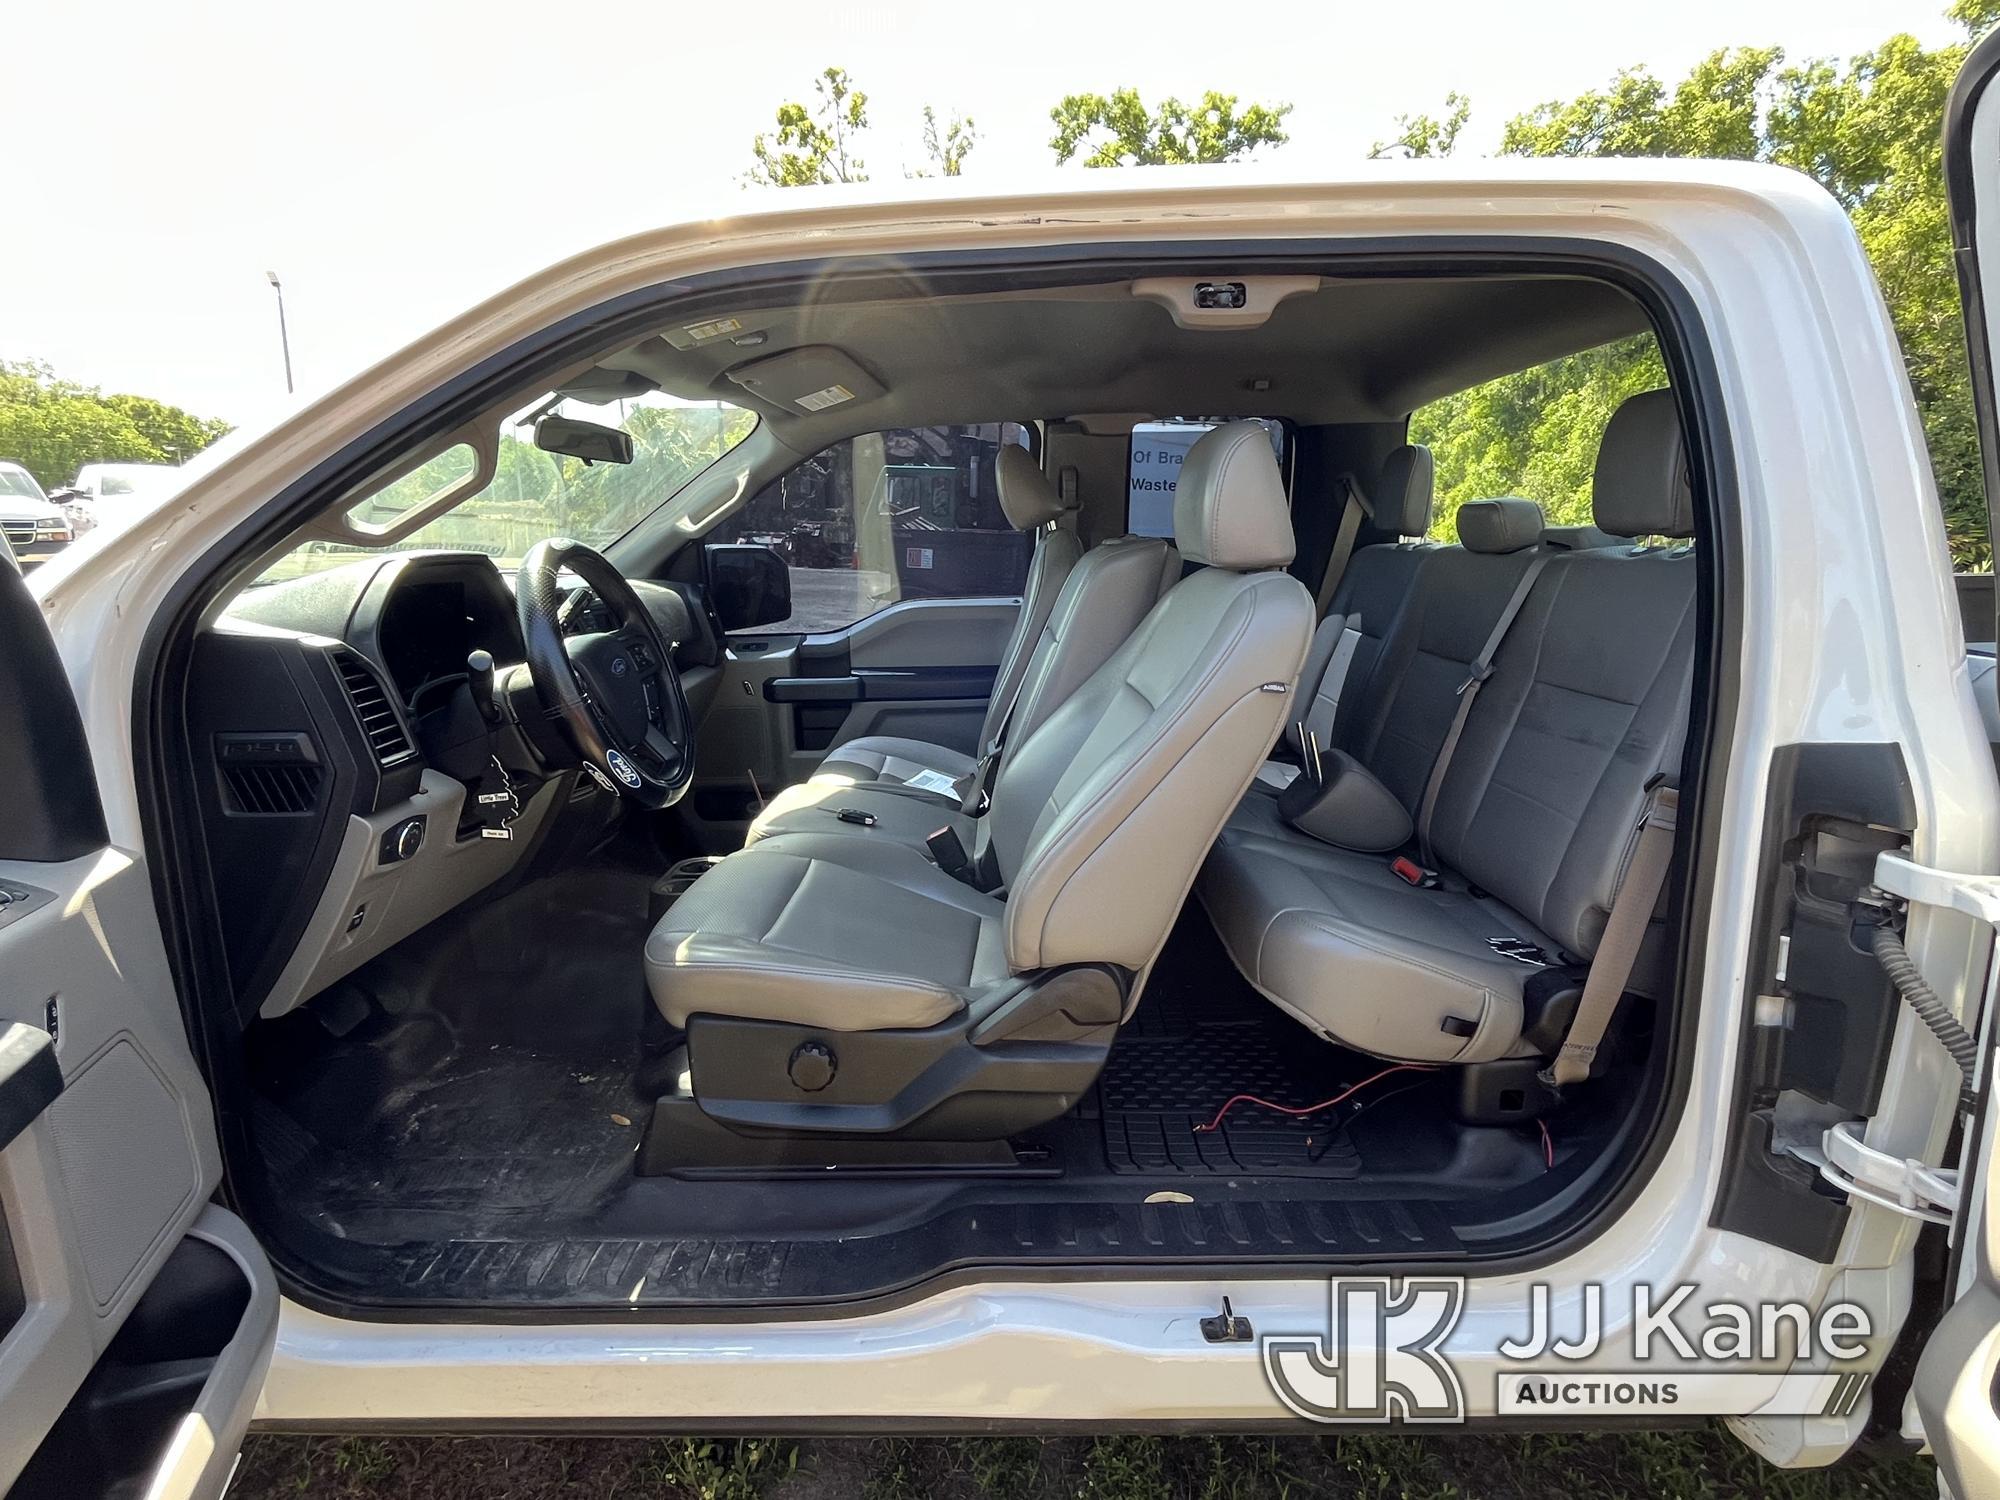 (Tampa, FL) 2019 Ford F150 Extended-Cab Pickup Truck Not Running, Does Not Start, Condition Unknown)